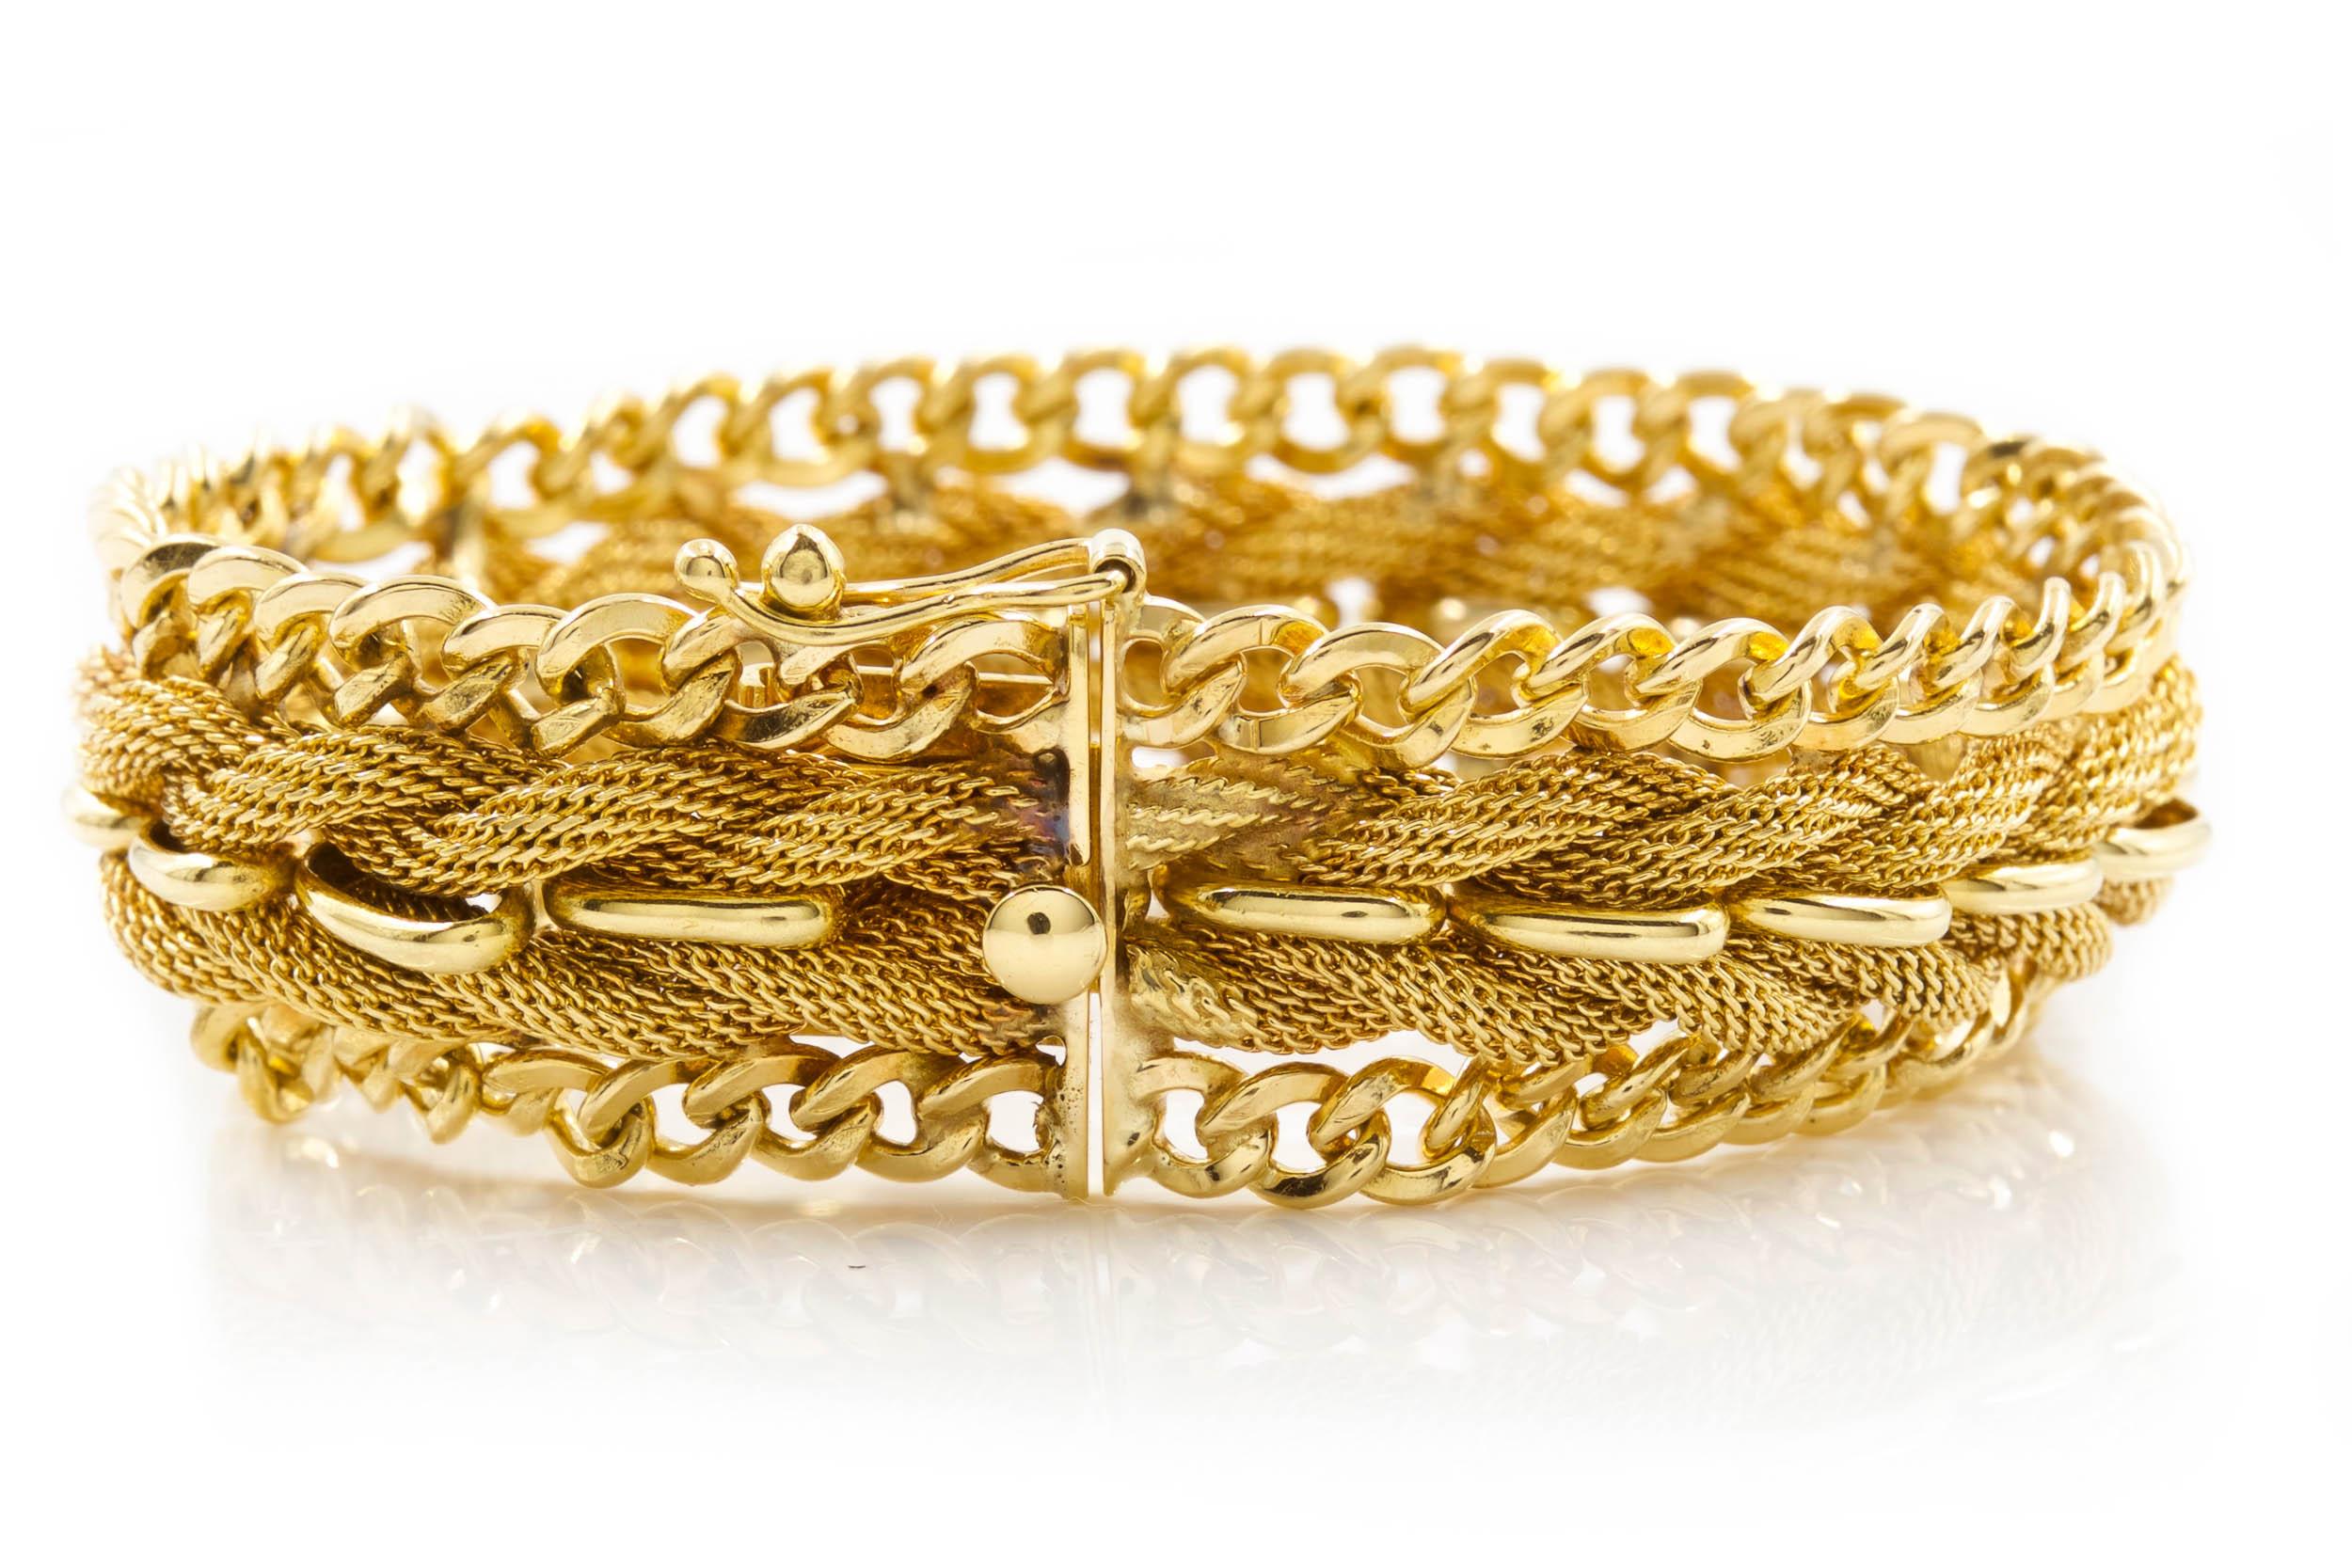 A very fun flexible-link bracelet executed entirely in 14 karat yellow gold by the goldsmith Aladdin Gold Creations of Illinois circa 1990. The bracelet is a rather creative mixture of outer chain links soldered to an inner woven mesh that is then